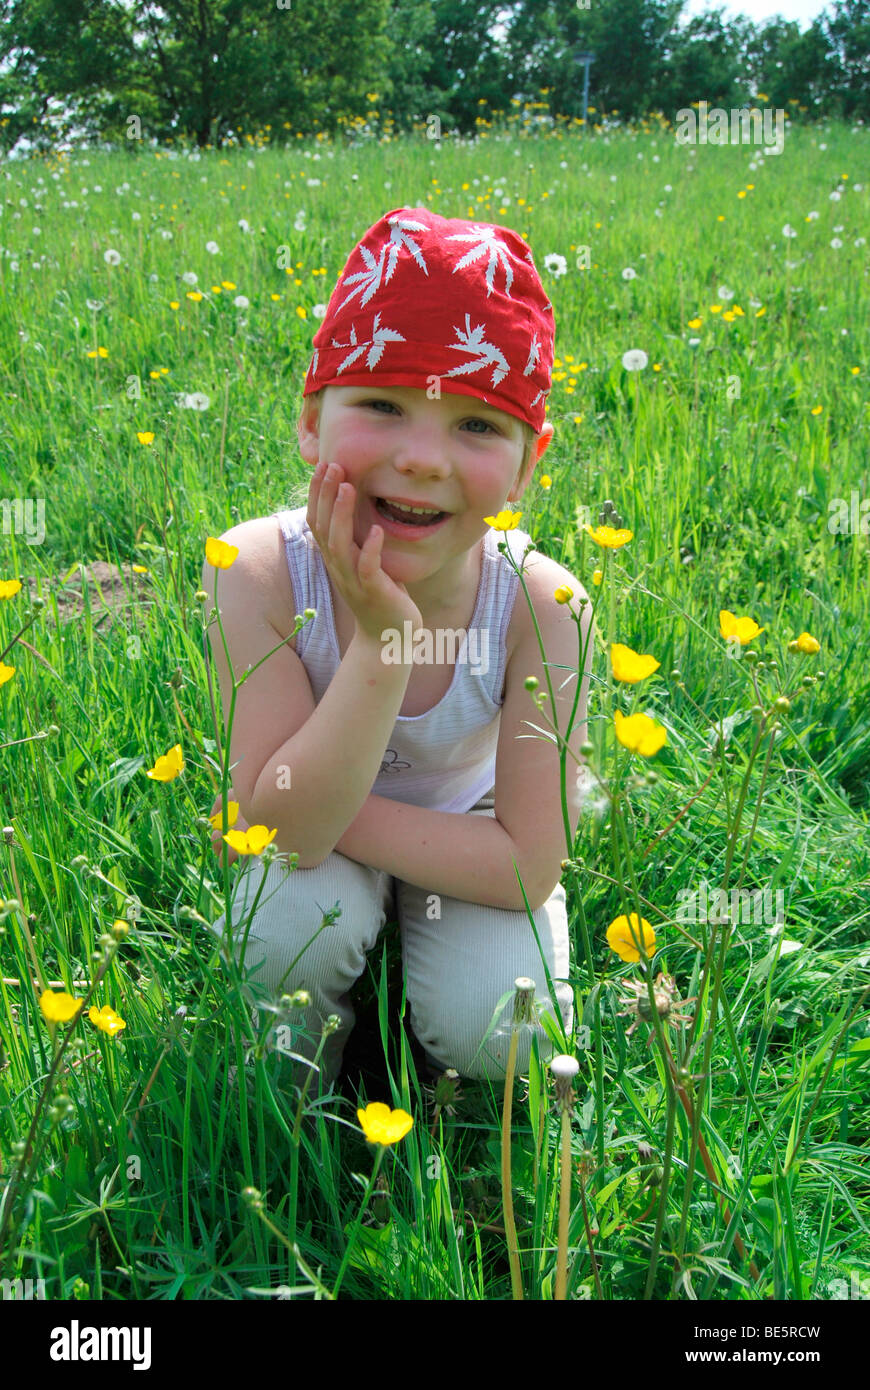 Happy girl, 5, wearing a red headscarf on a summer lawn with Kingcup or Marsh Marigold and Dandelions Stock Photo